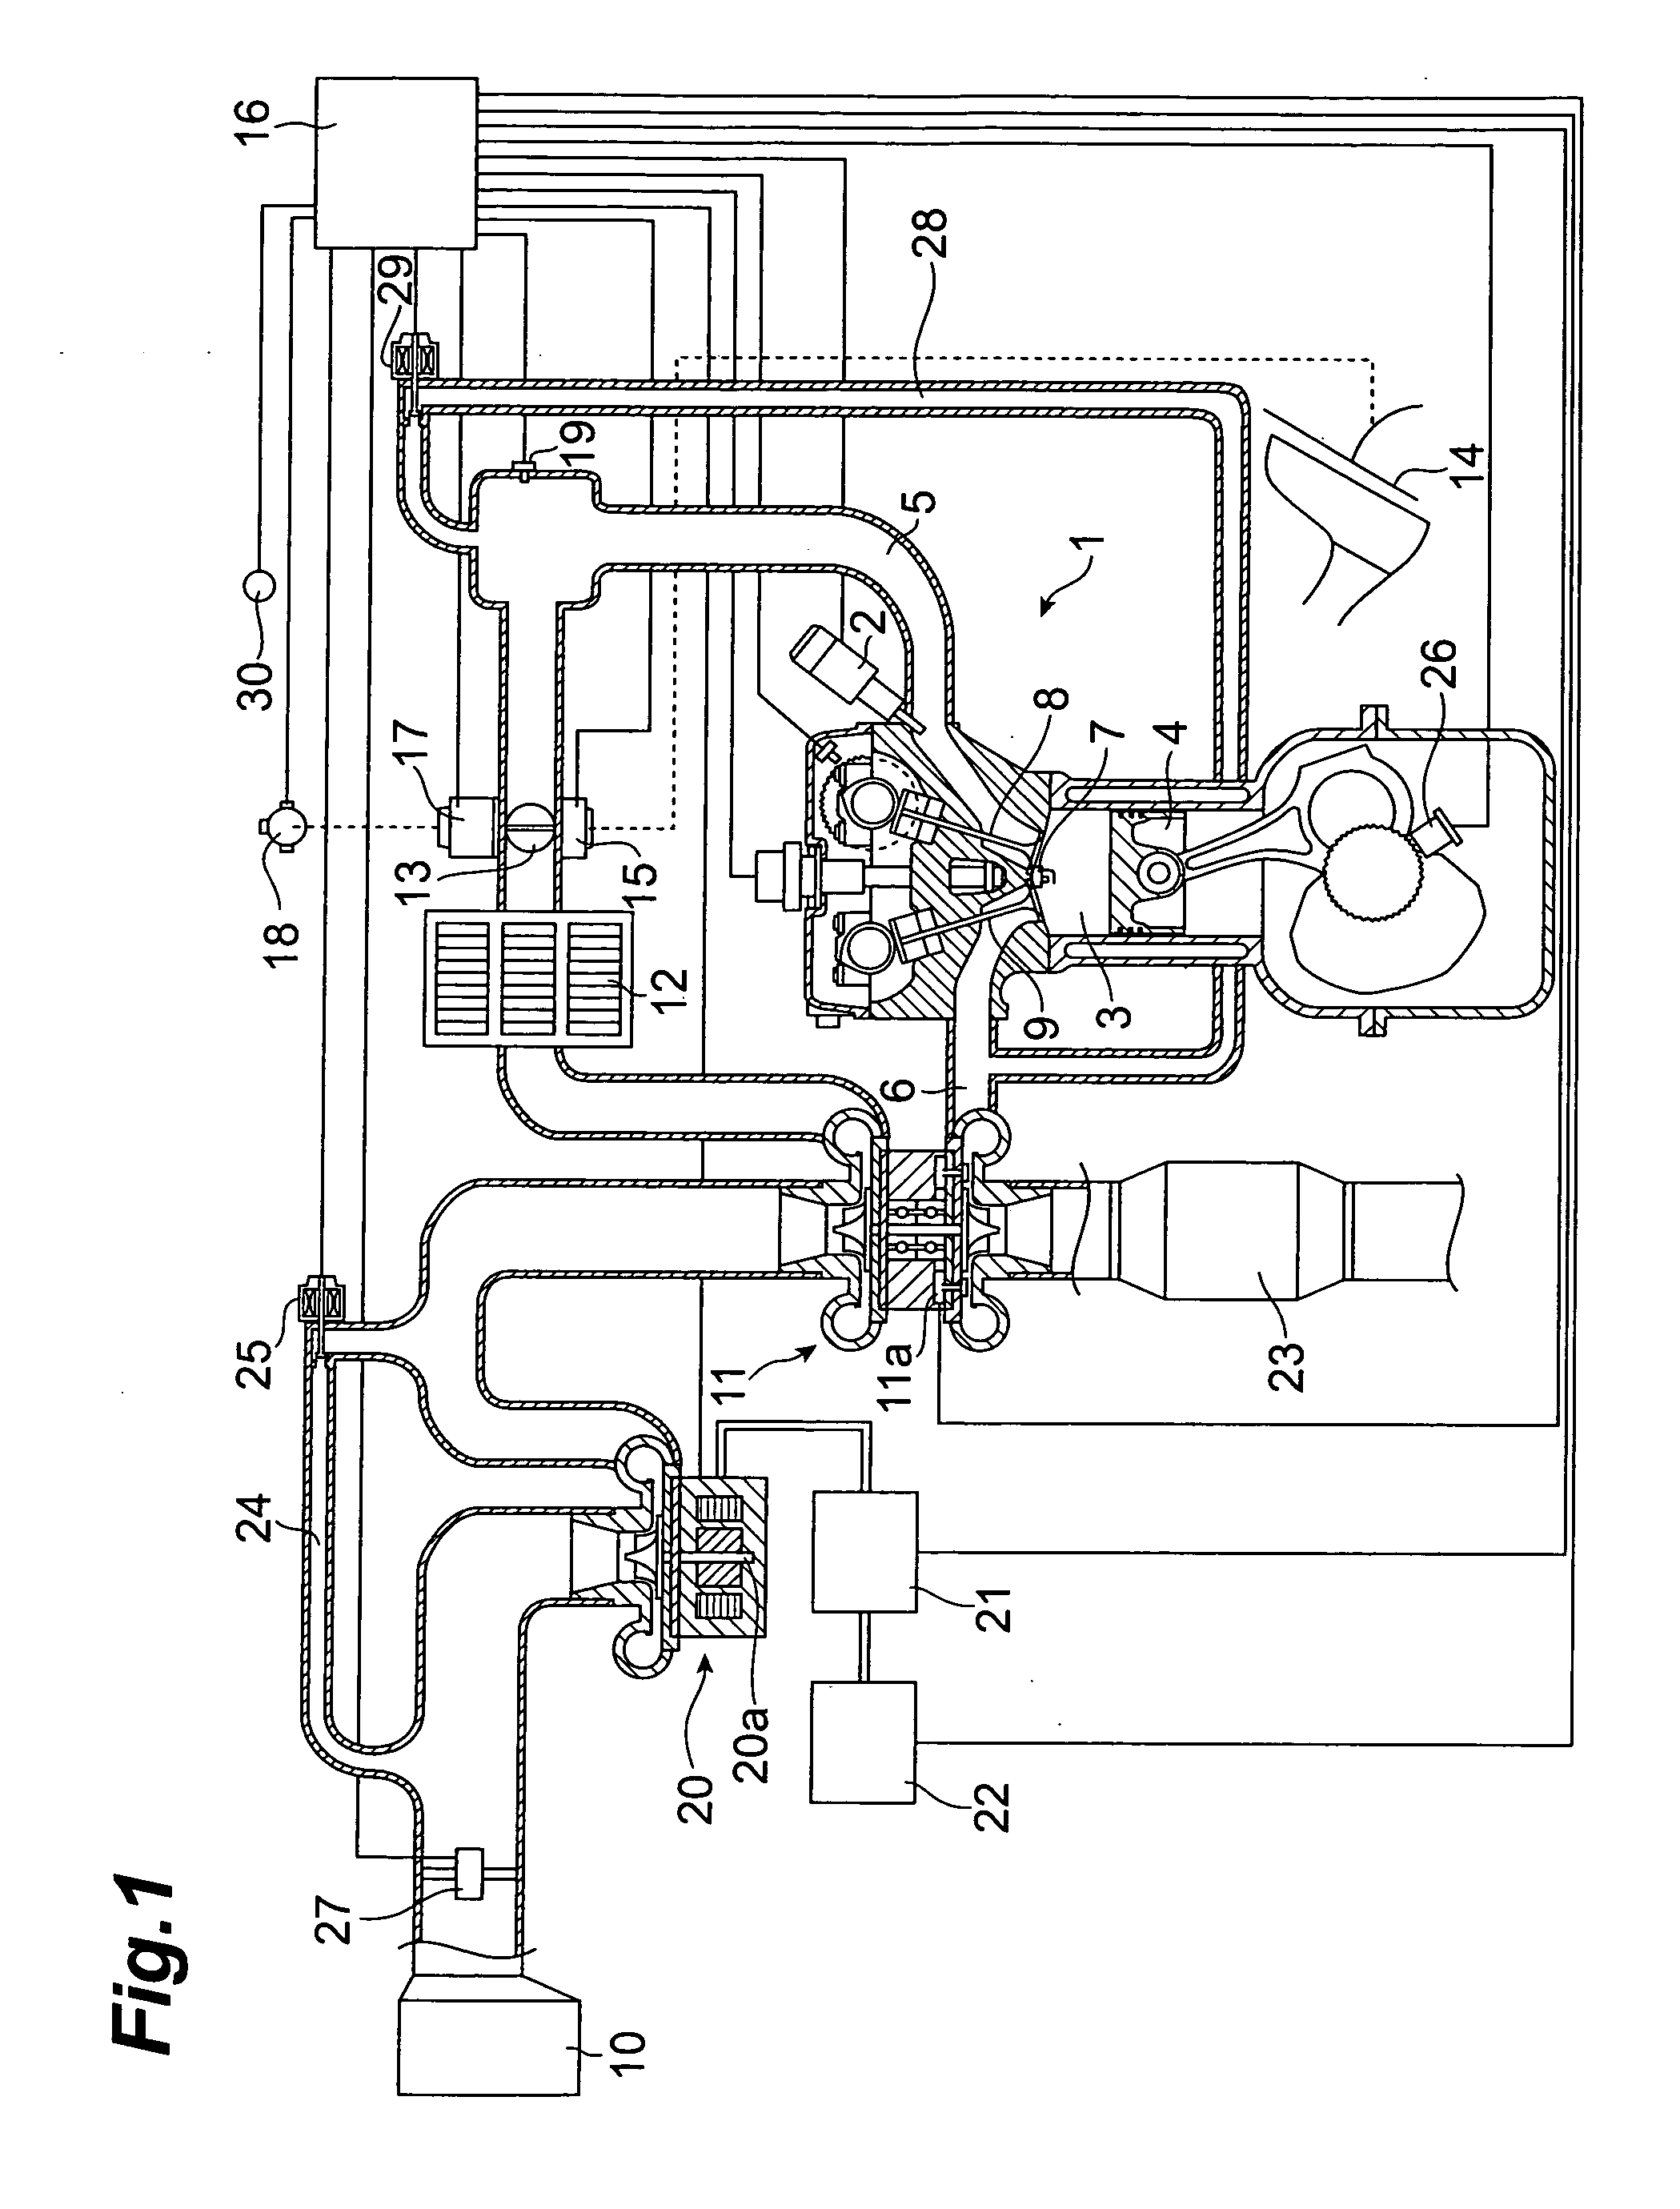 Control Device Supercharger with Electric Motor